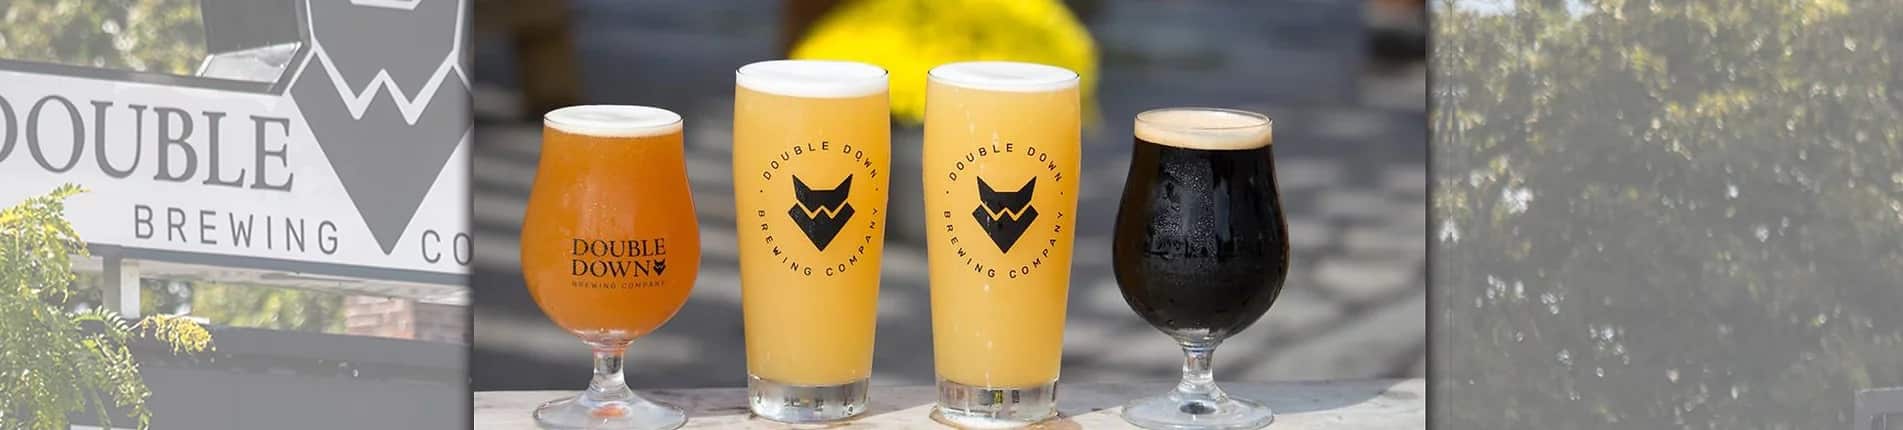 Double Down Brewing Company